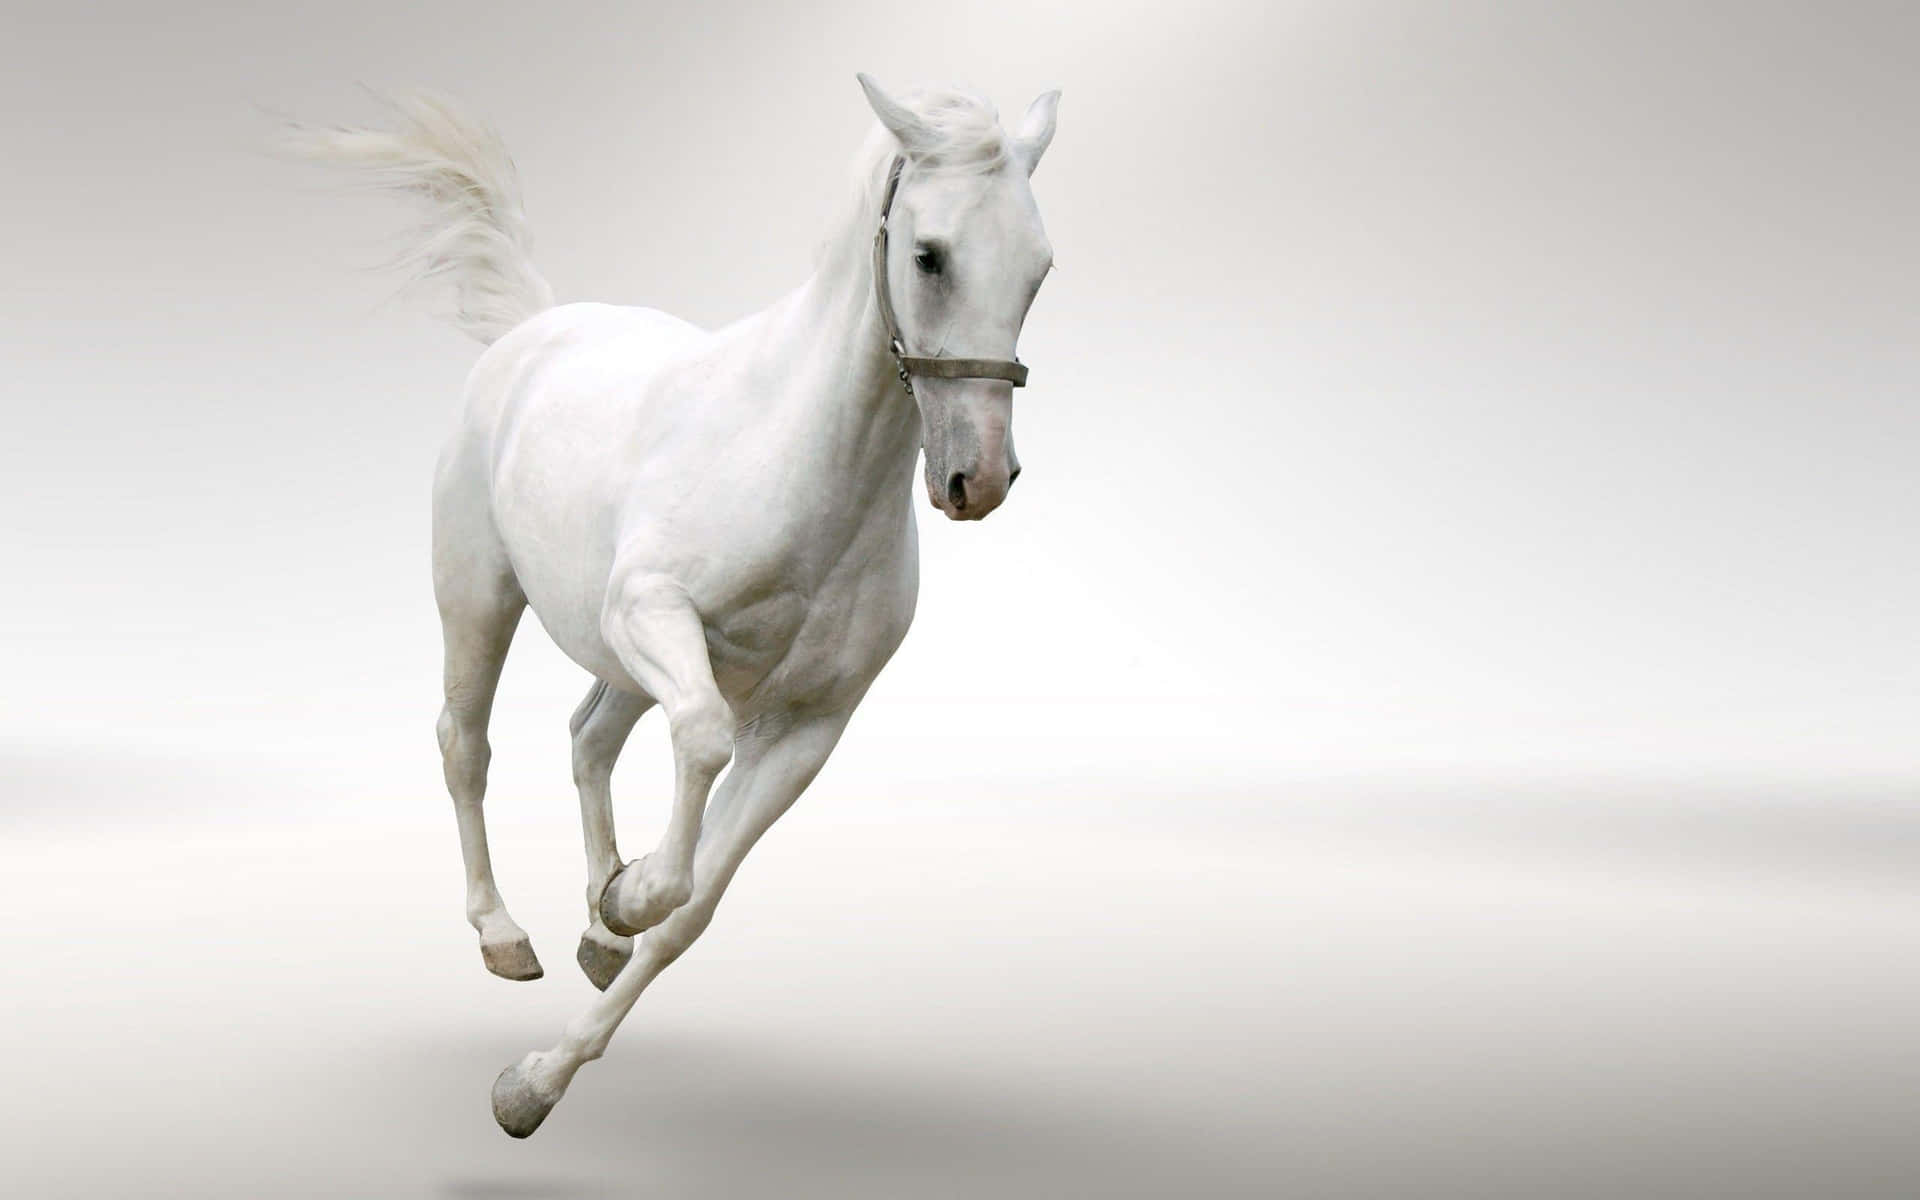 Image  A Majestic White Horse Showing Off its Beautiful Mane